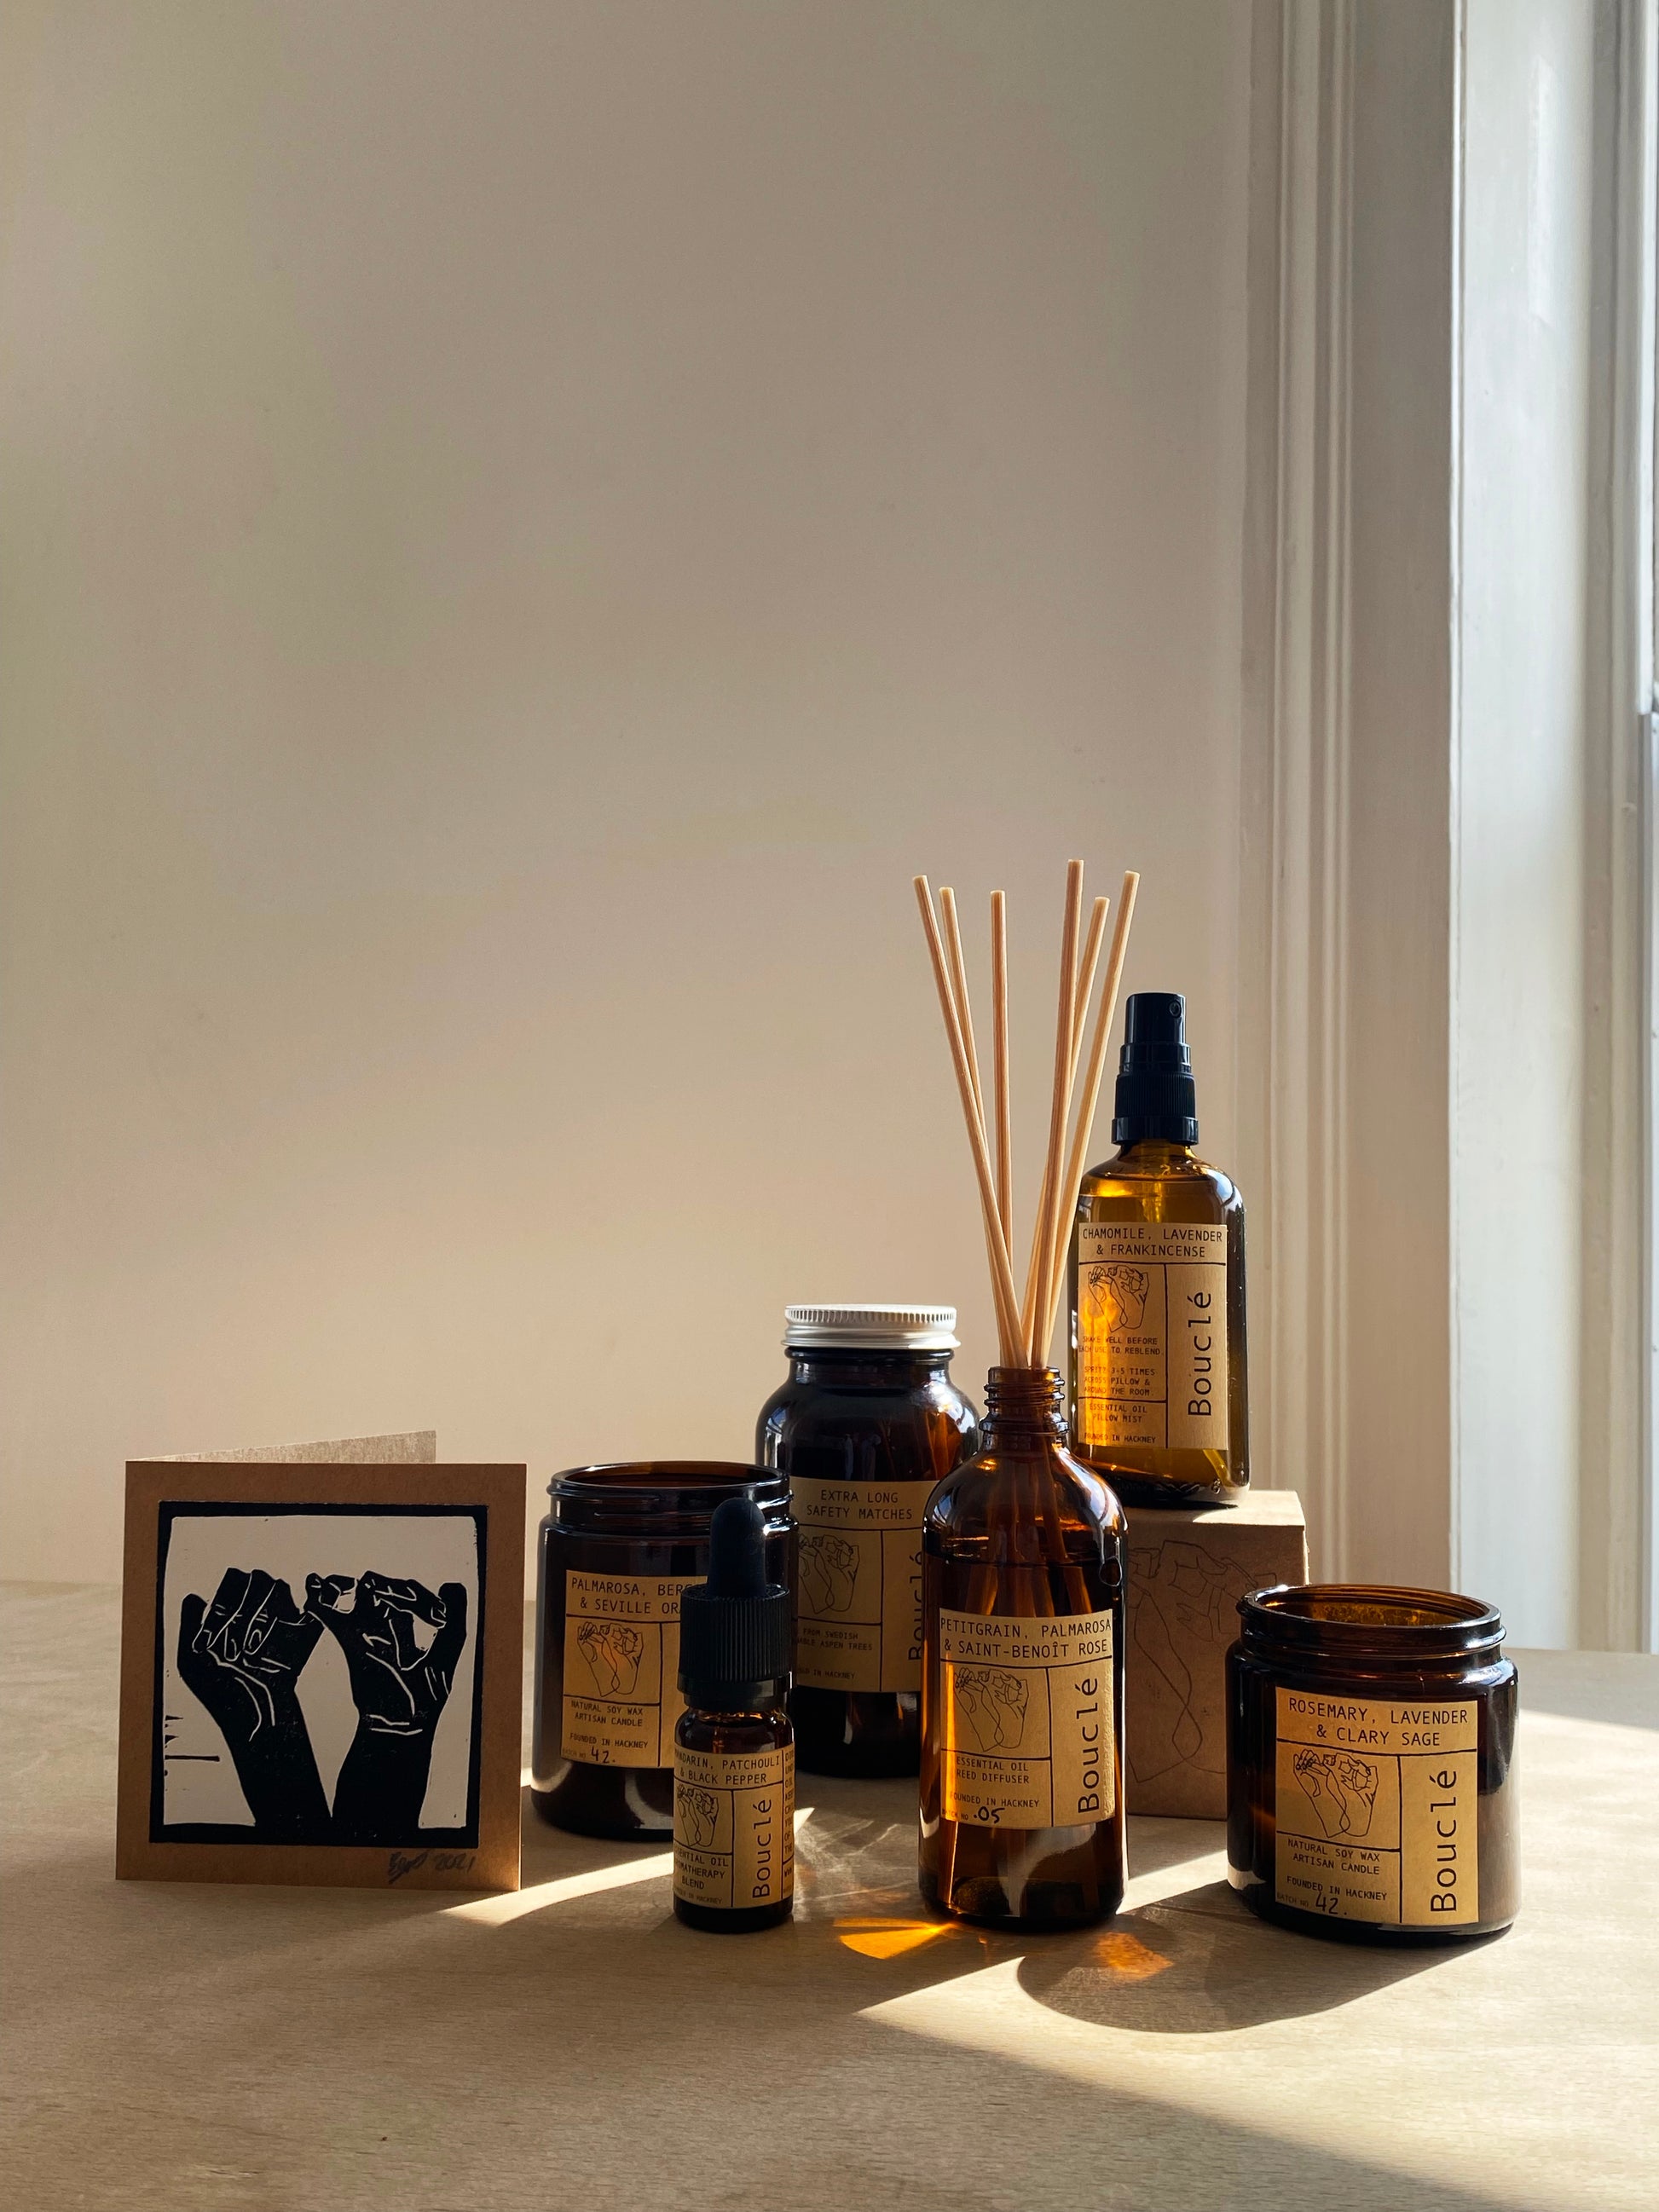 Pure essential oil luxury products by Bouclé founded in Hackney as a small business